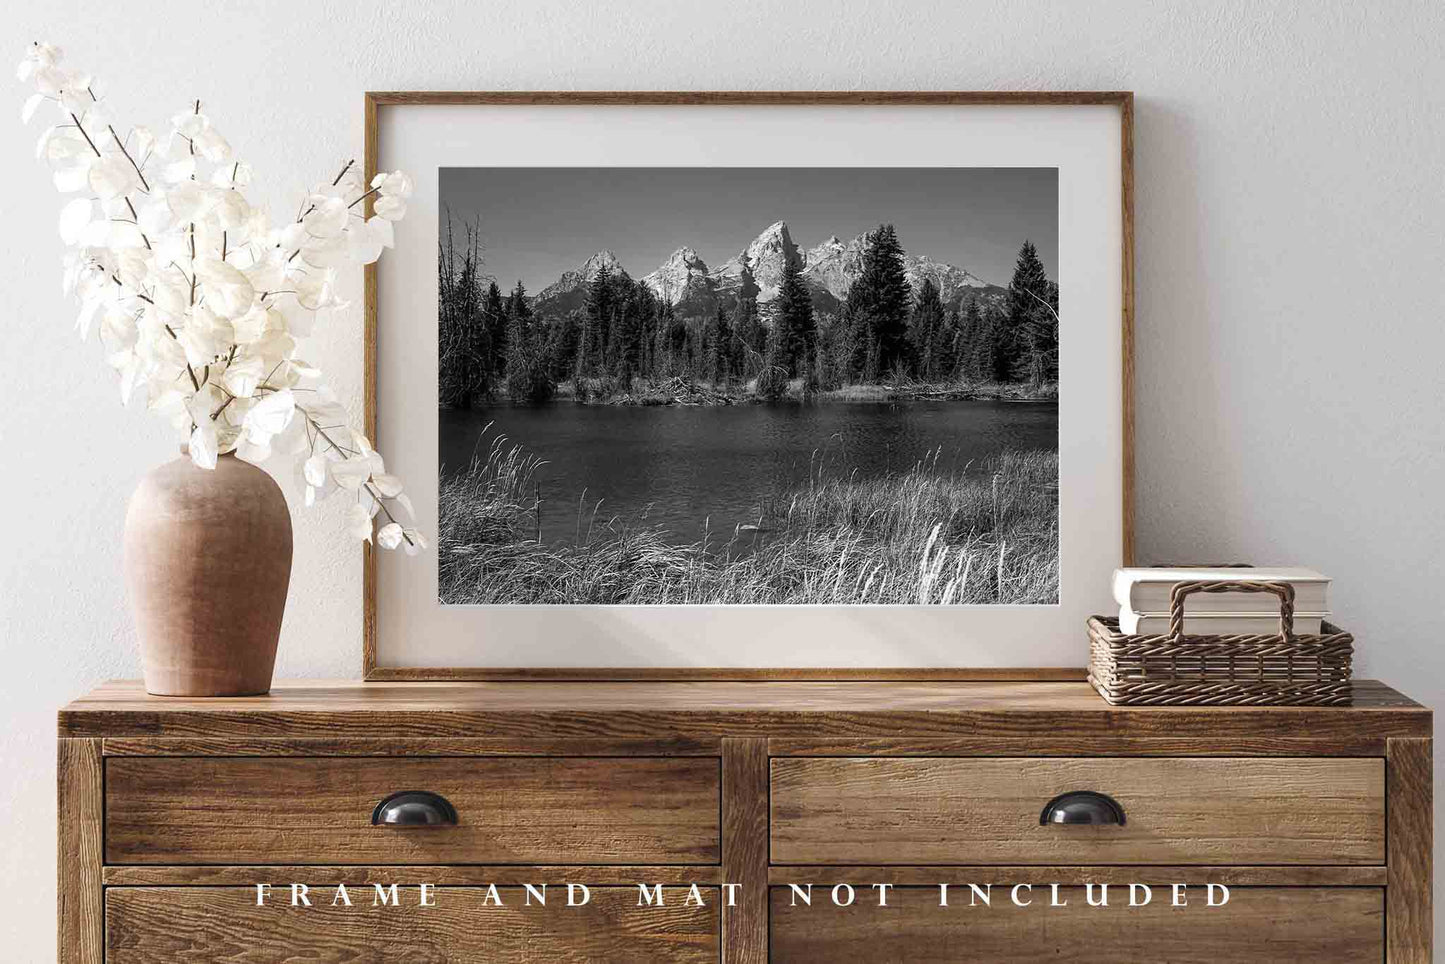 Black and White Print of Grand Teton - Wyoming Wall Art Picture Rocky Mountain Home Decor - Landscape Photography Photo Artwork